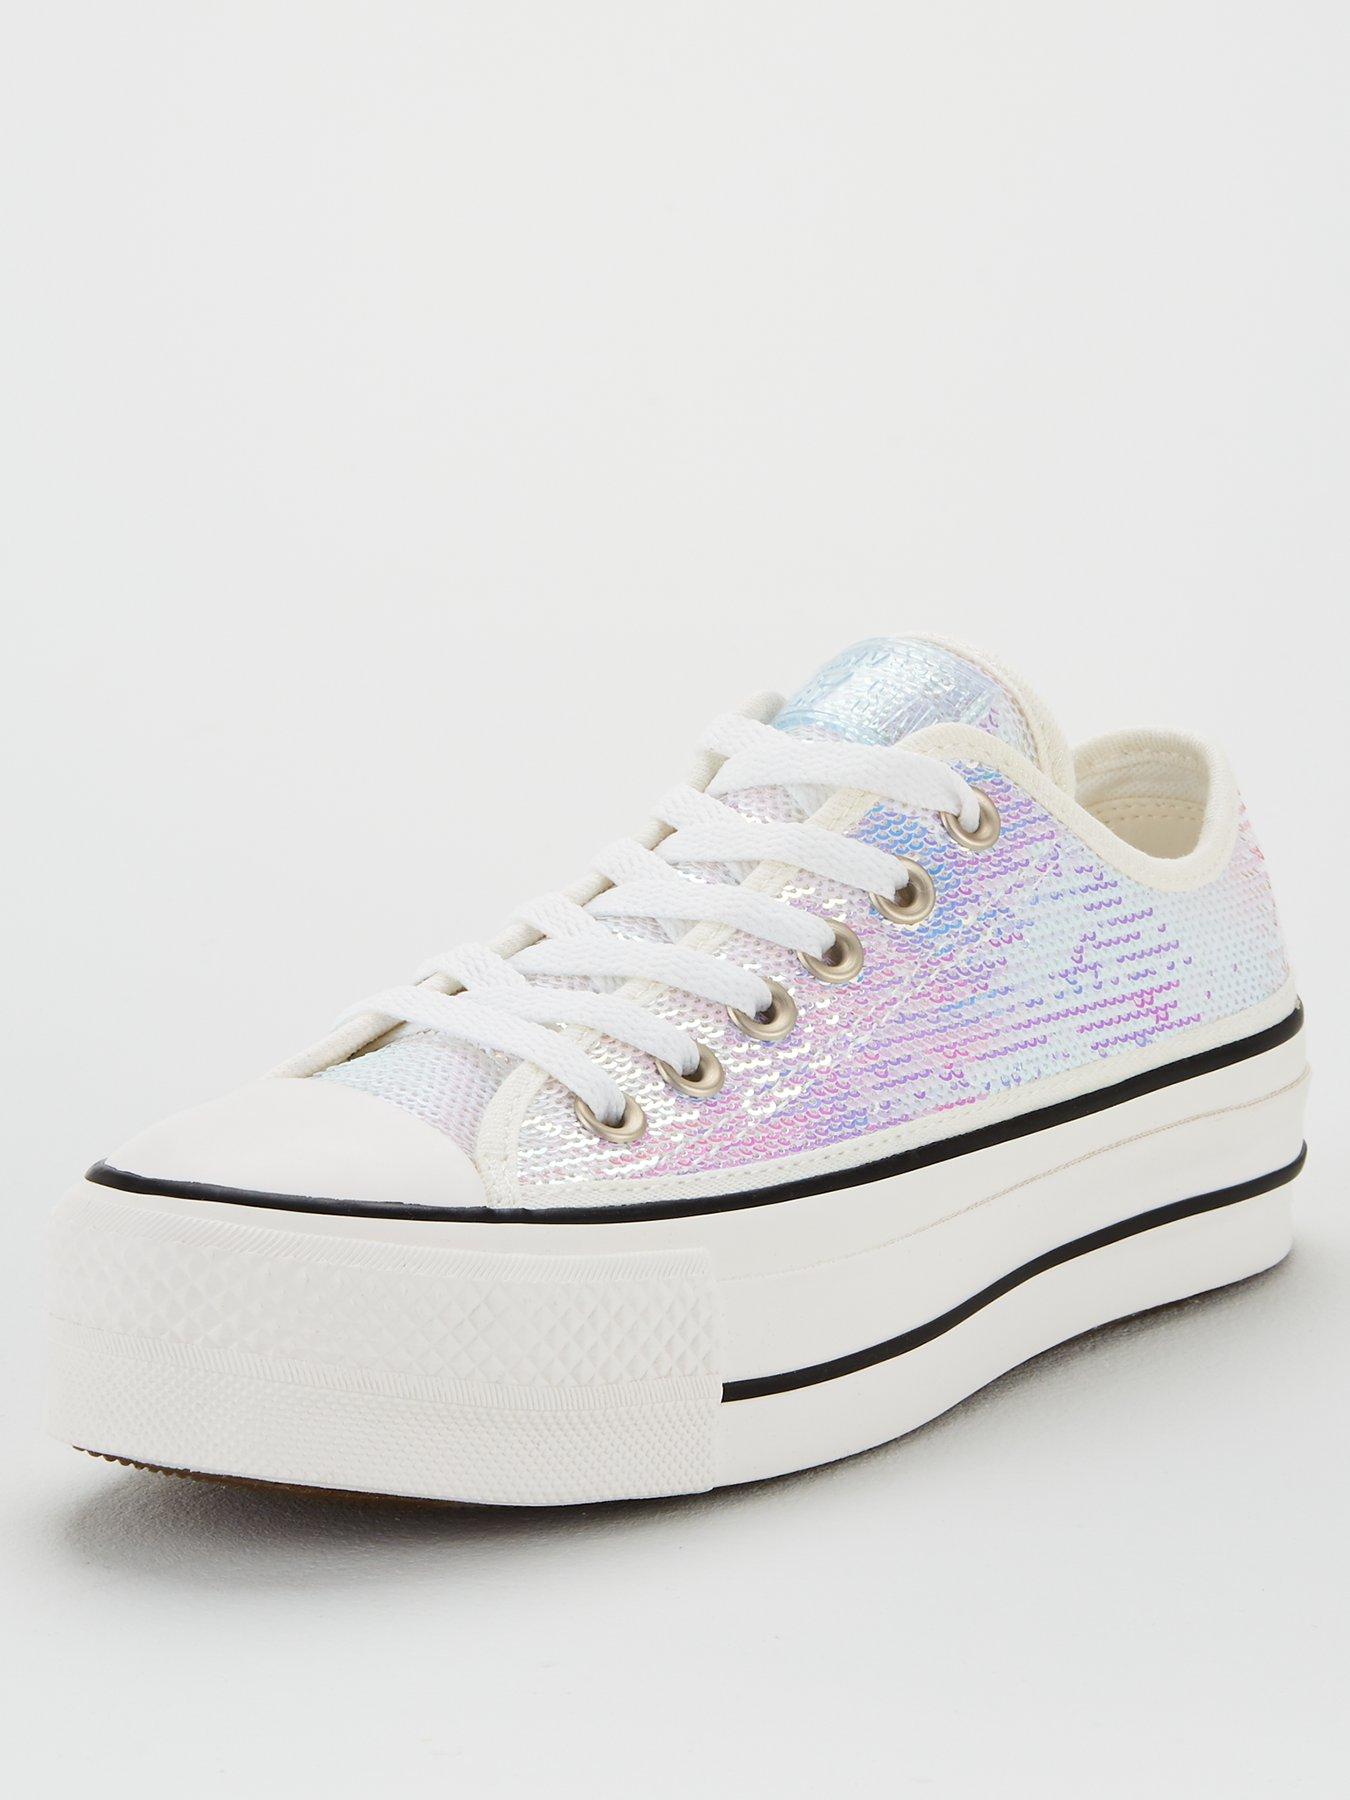 sequined converse all stars